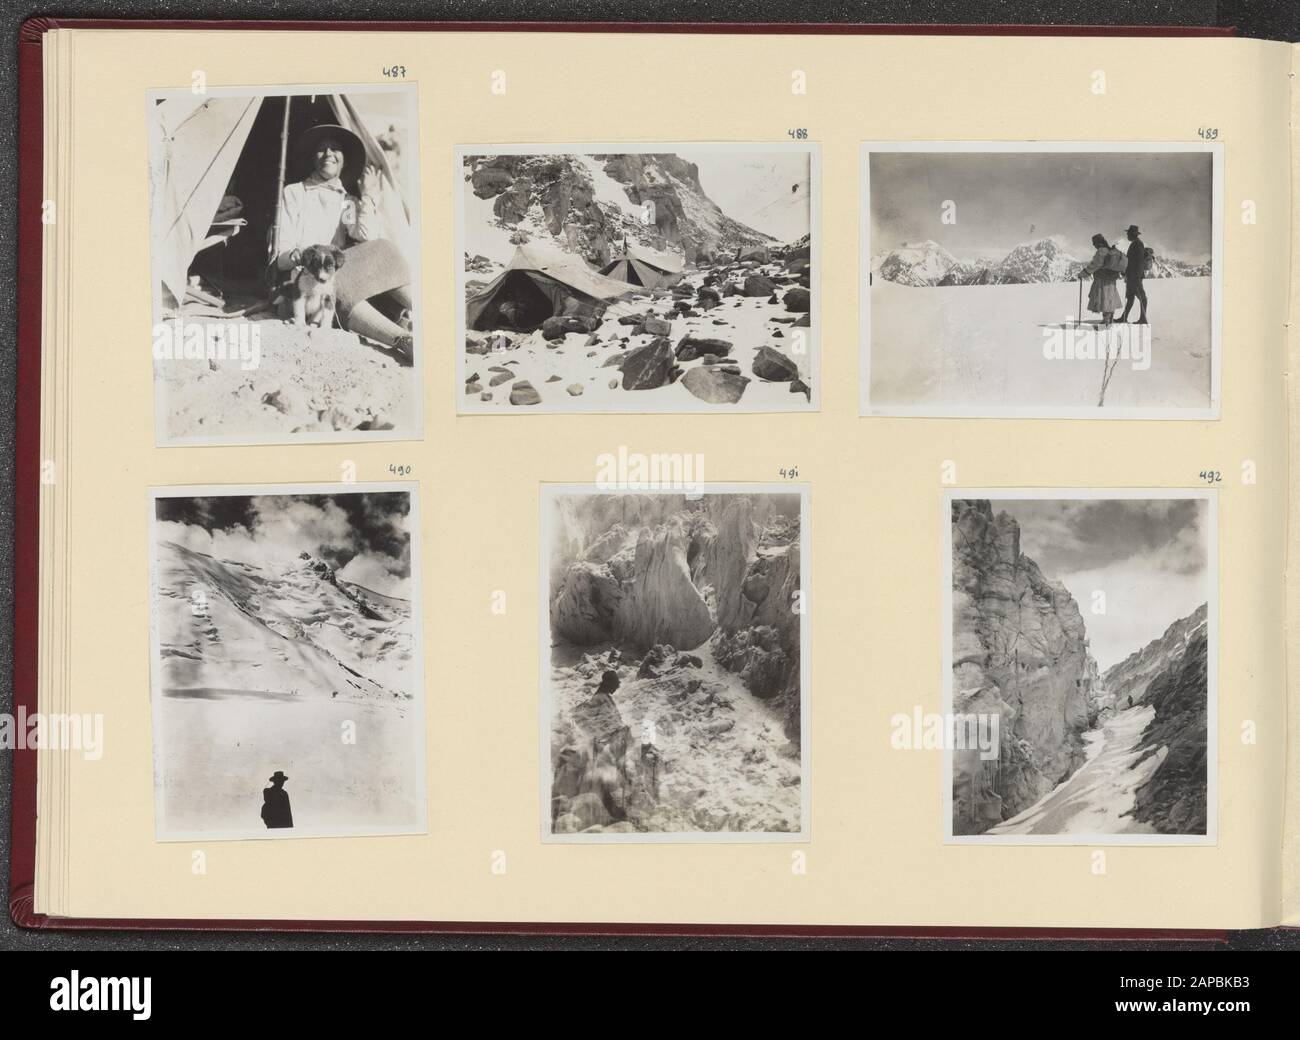 Photoalbum Fisherman: First Karakoru expedition, 1922 Description: Album sheet with six photos. Upper left: Jenny Visser-Hooft and the puppy Tshi Tsering in front of the tent in the camp near the Lashi glacier; upper middle: the highest camp at the Lashi glacier; upper right: Ph.C. Fisherman and a cooler at the view of the Lashi mountains; lower left: Ph.C. Fisherman at the view of the Lashi mountains to south; lower middle: double recording, view of the Maulong glacier and the mountain slope; lower right: A 'edge' of the Maulong glacier seen downhill Date: 1922/07/19 Location: India, Karakoru Stock Photo